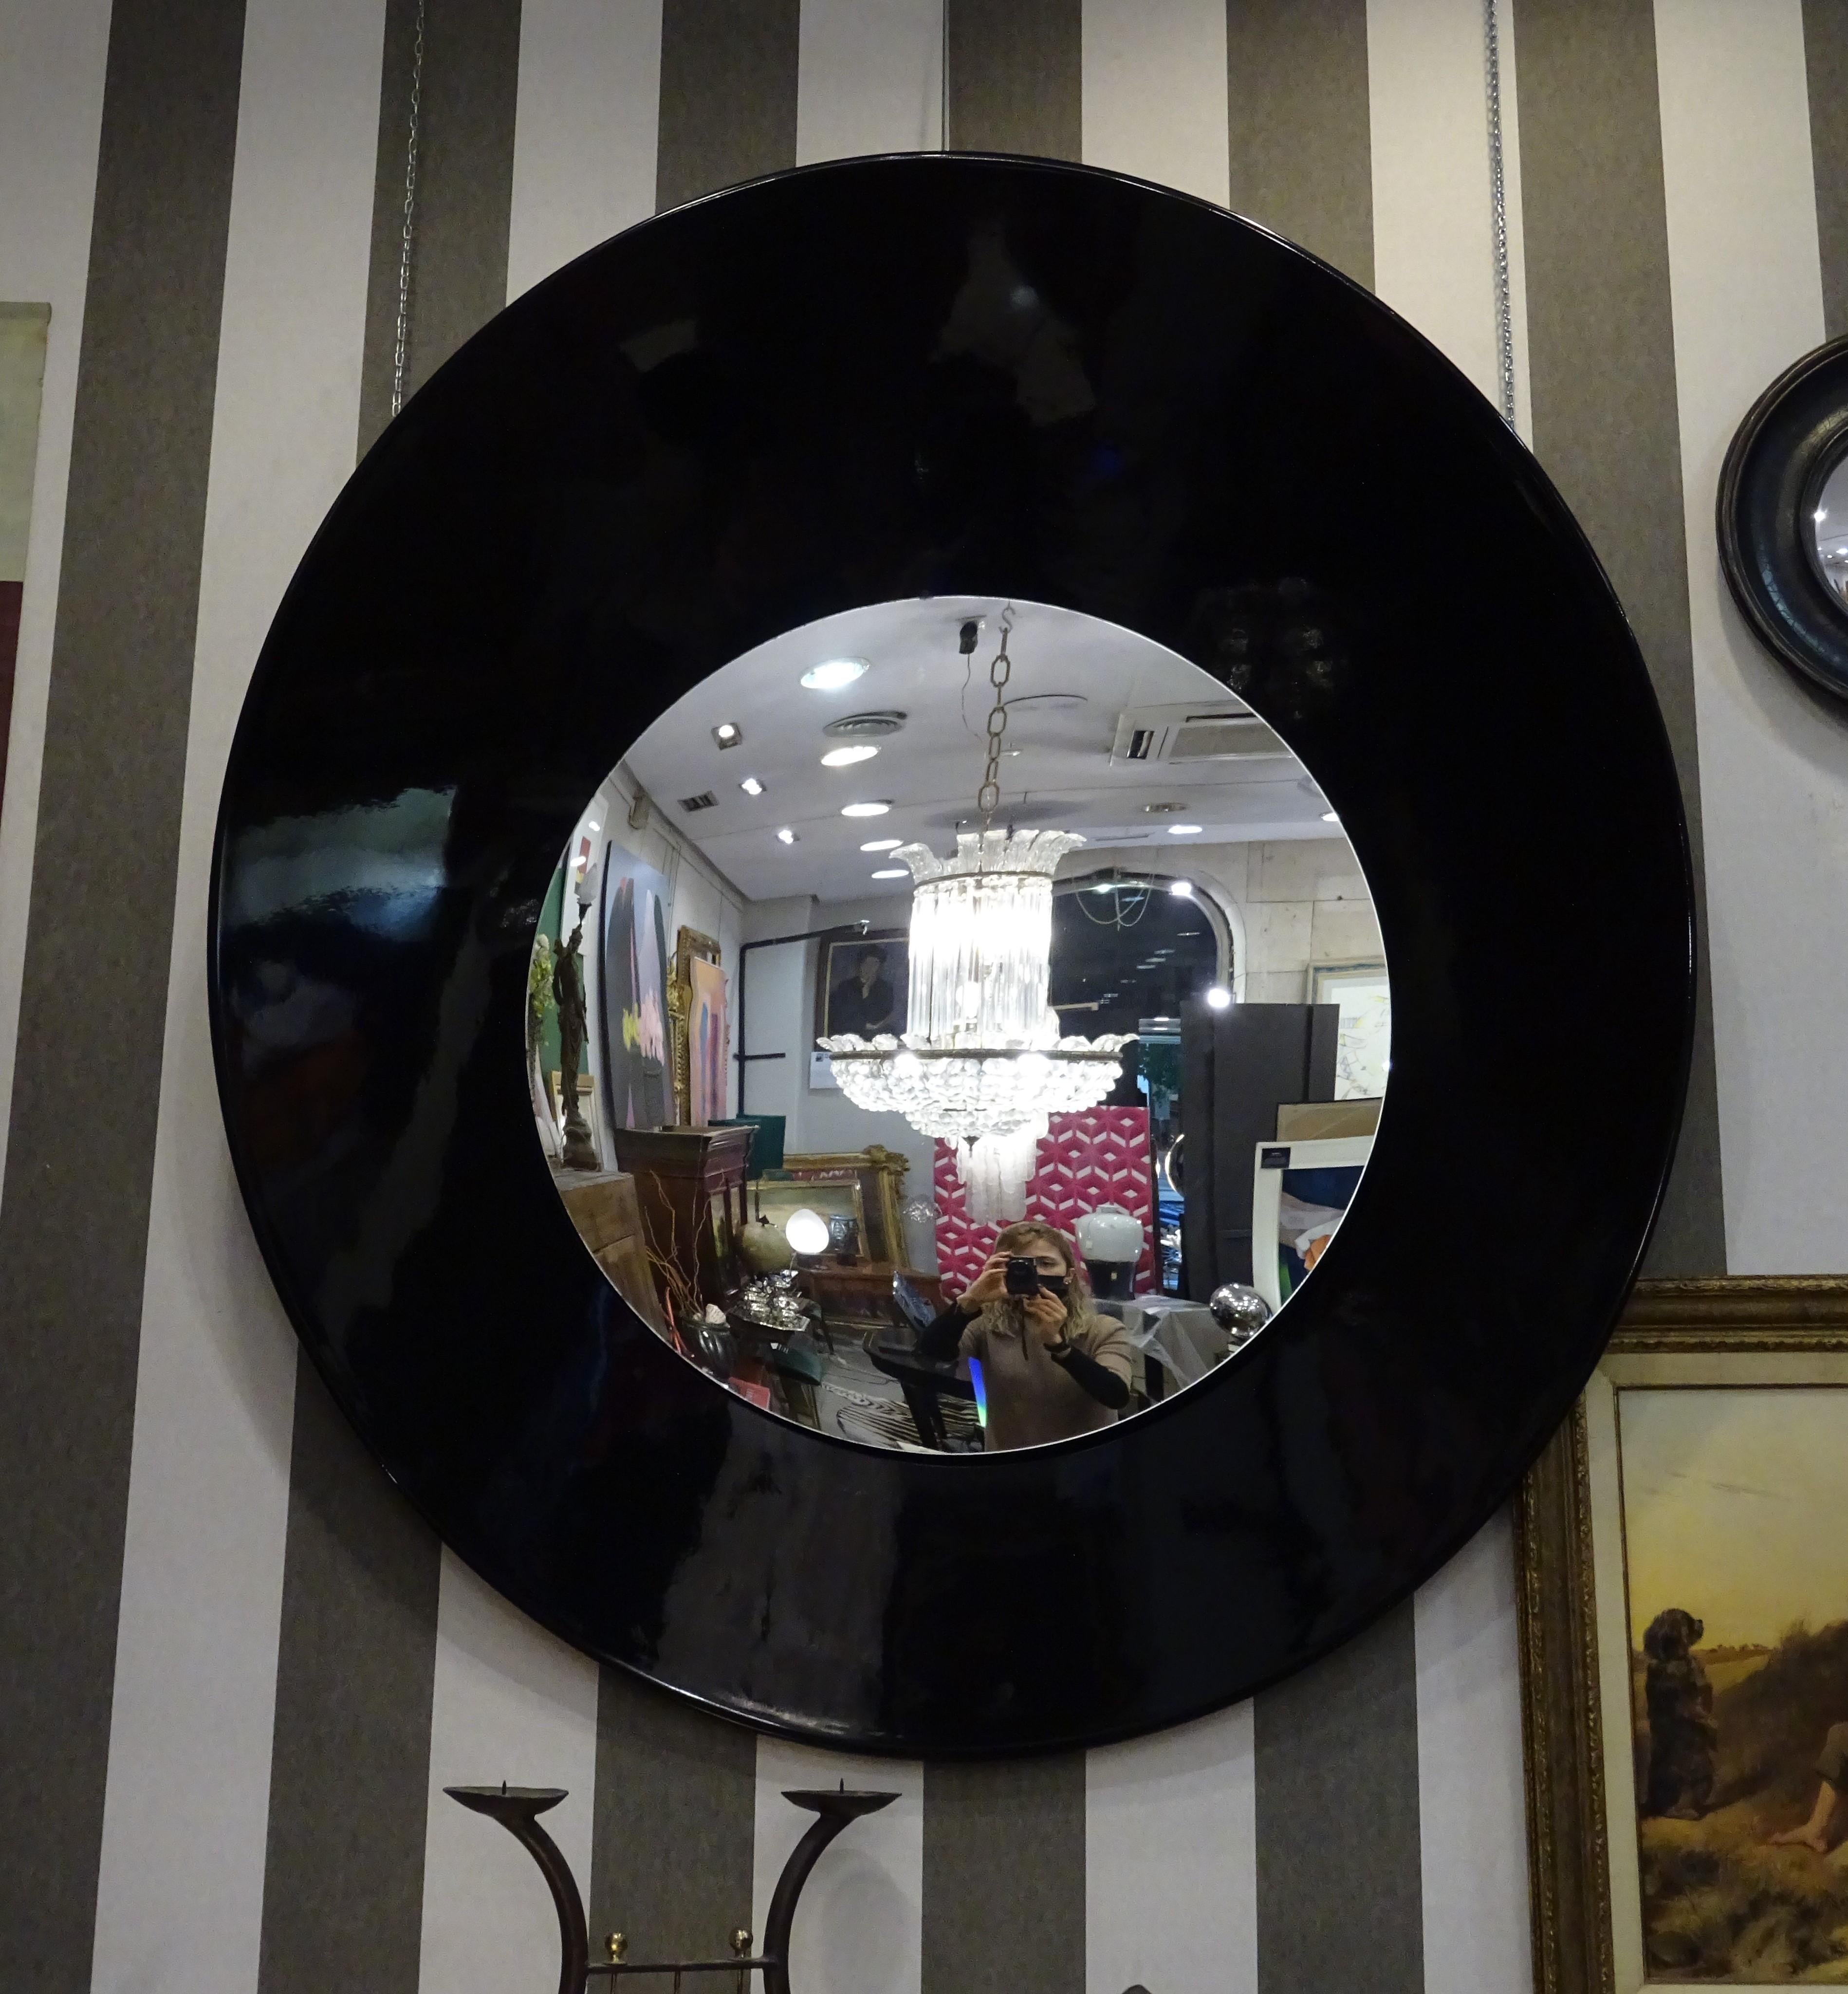 Outstanding Italian mirror, 70s, midcentury, style of Fontana Arte Atelier Fontana.
As a sculpture, made of black fiberglass, ellipse shape with the convex mirror glass in circular shape placed in high relief. The glass has a small lack of